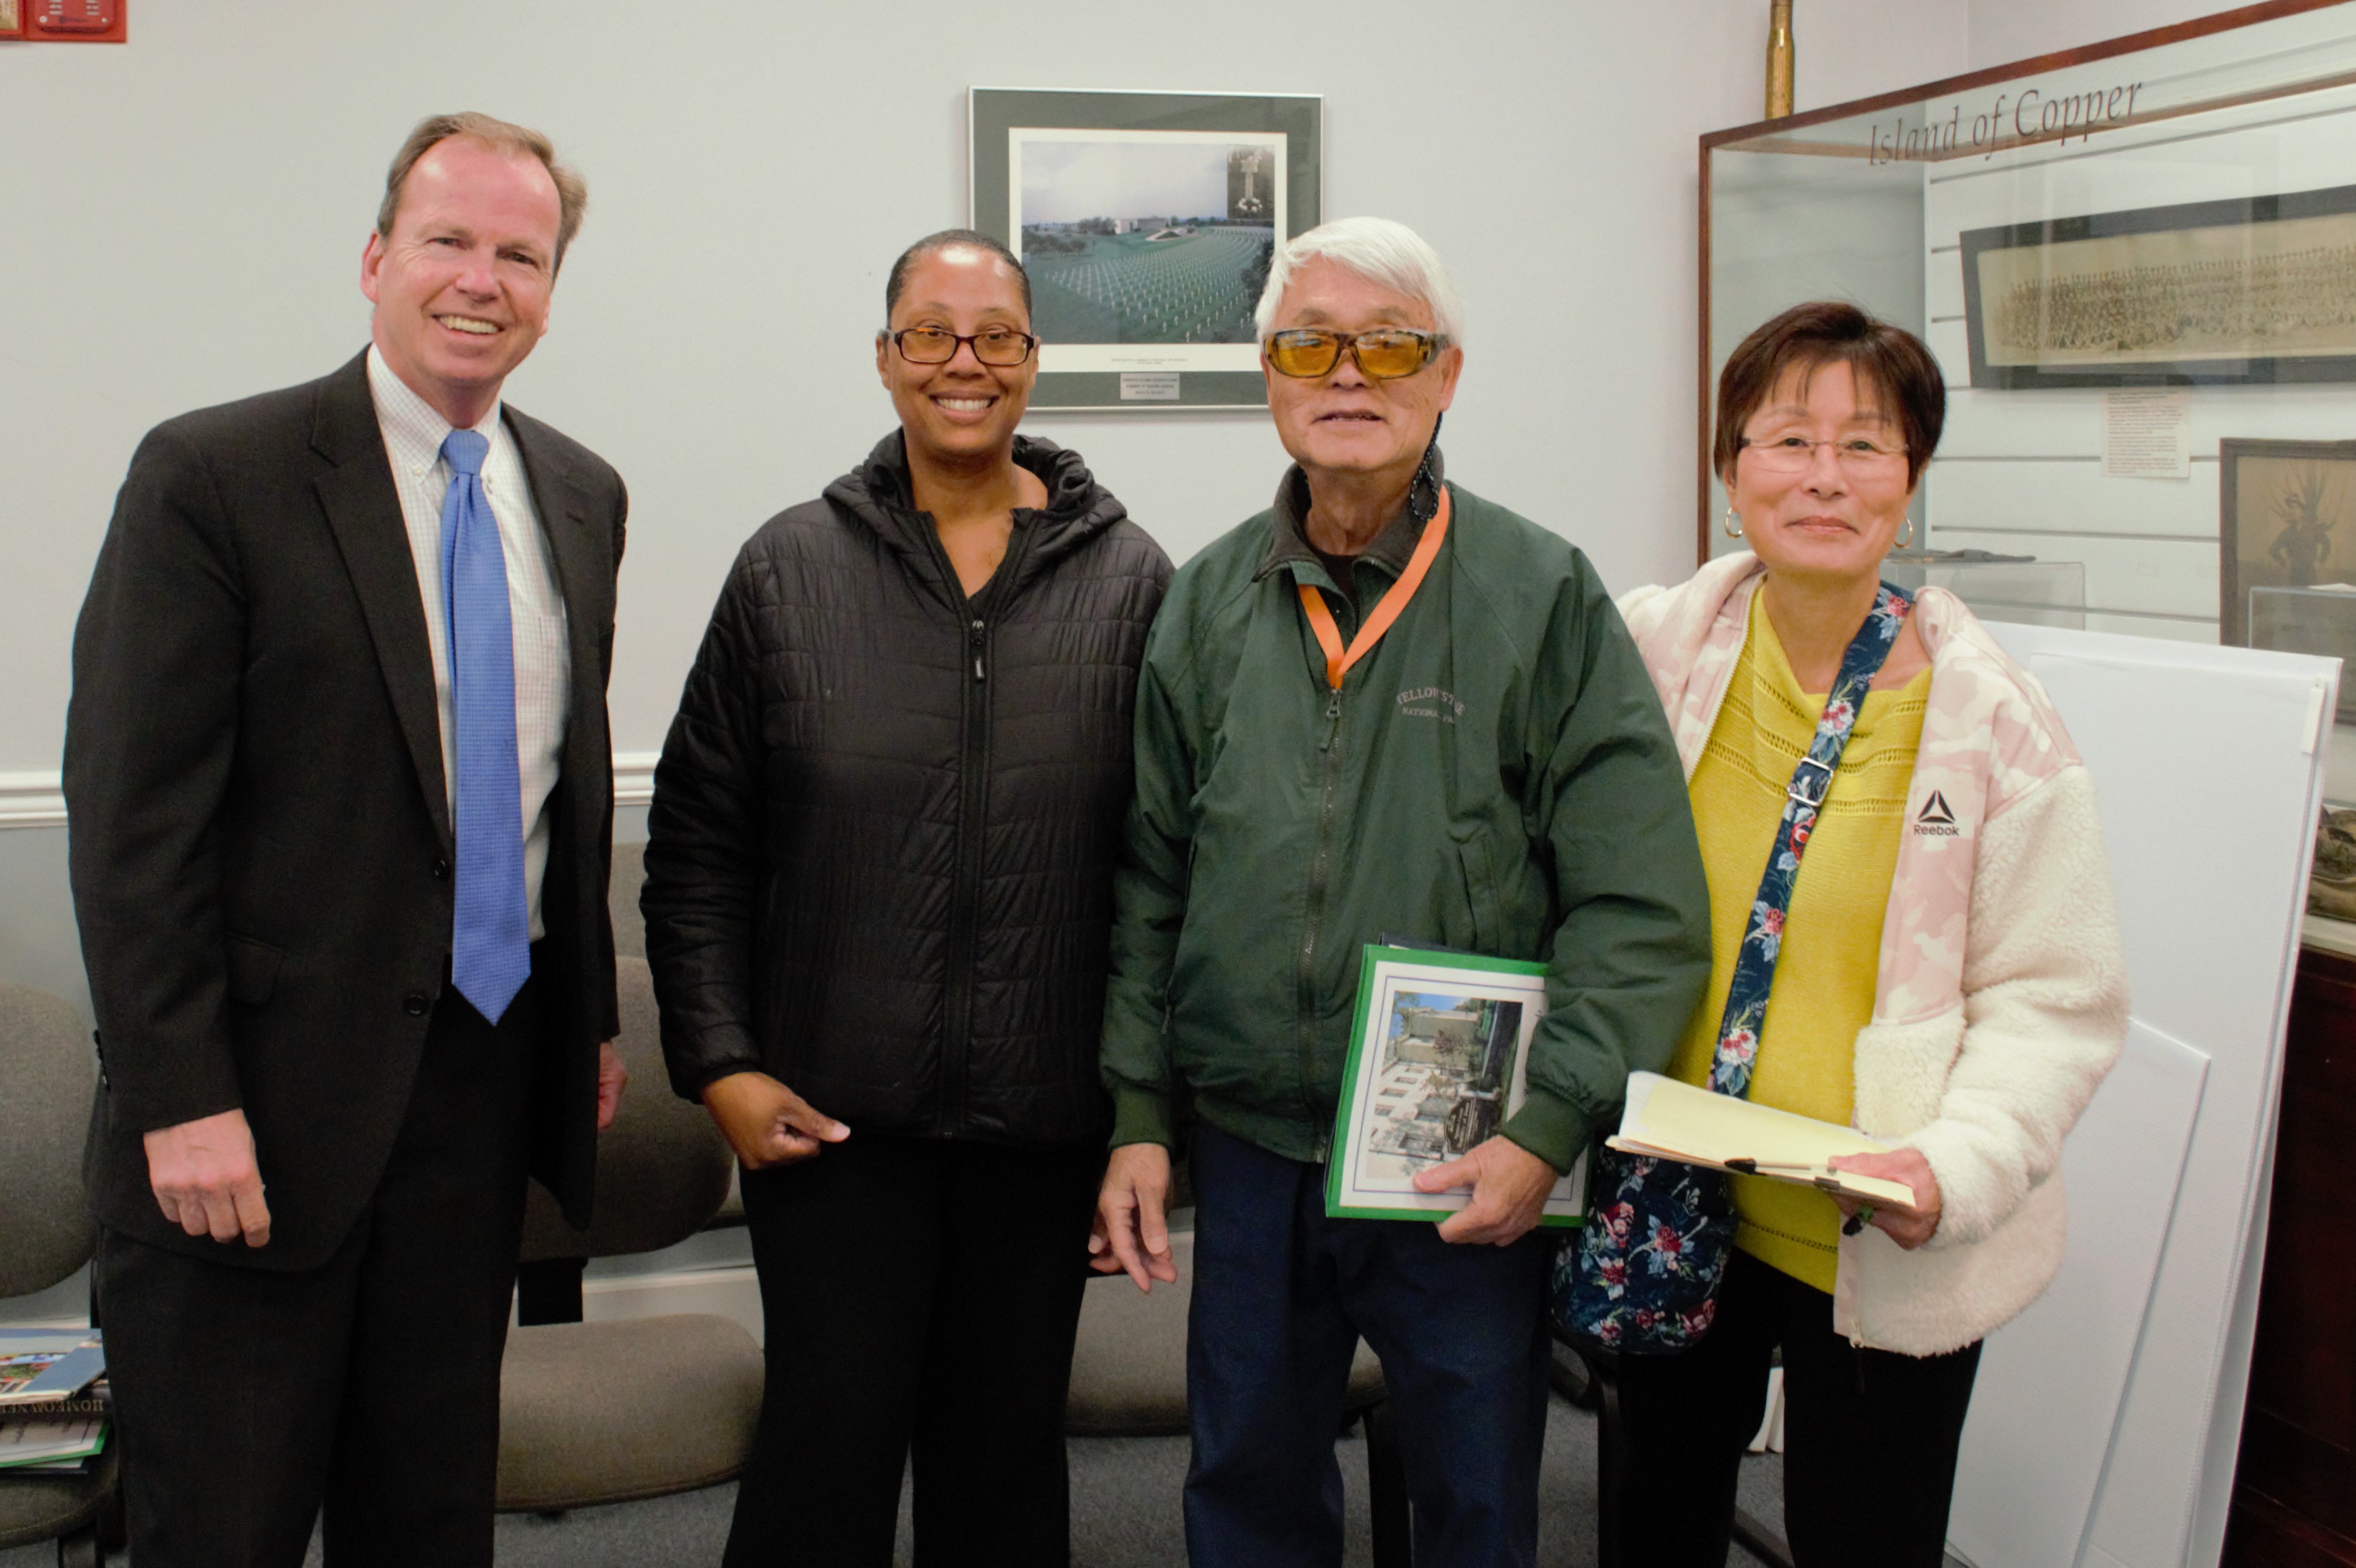 Norfolk County Register of Deeds Visits Randolph Town Hall